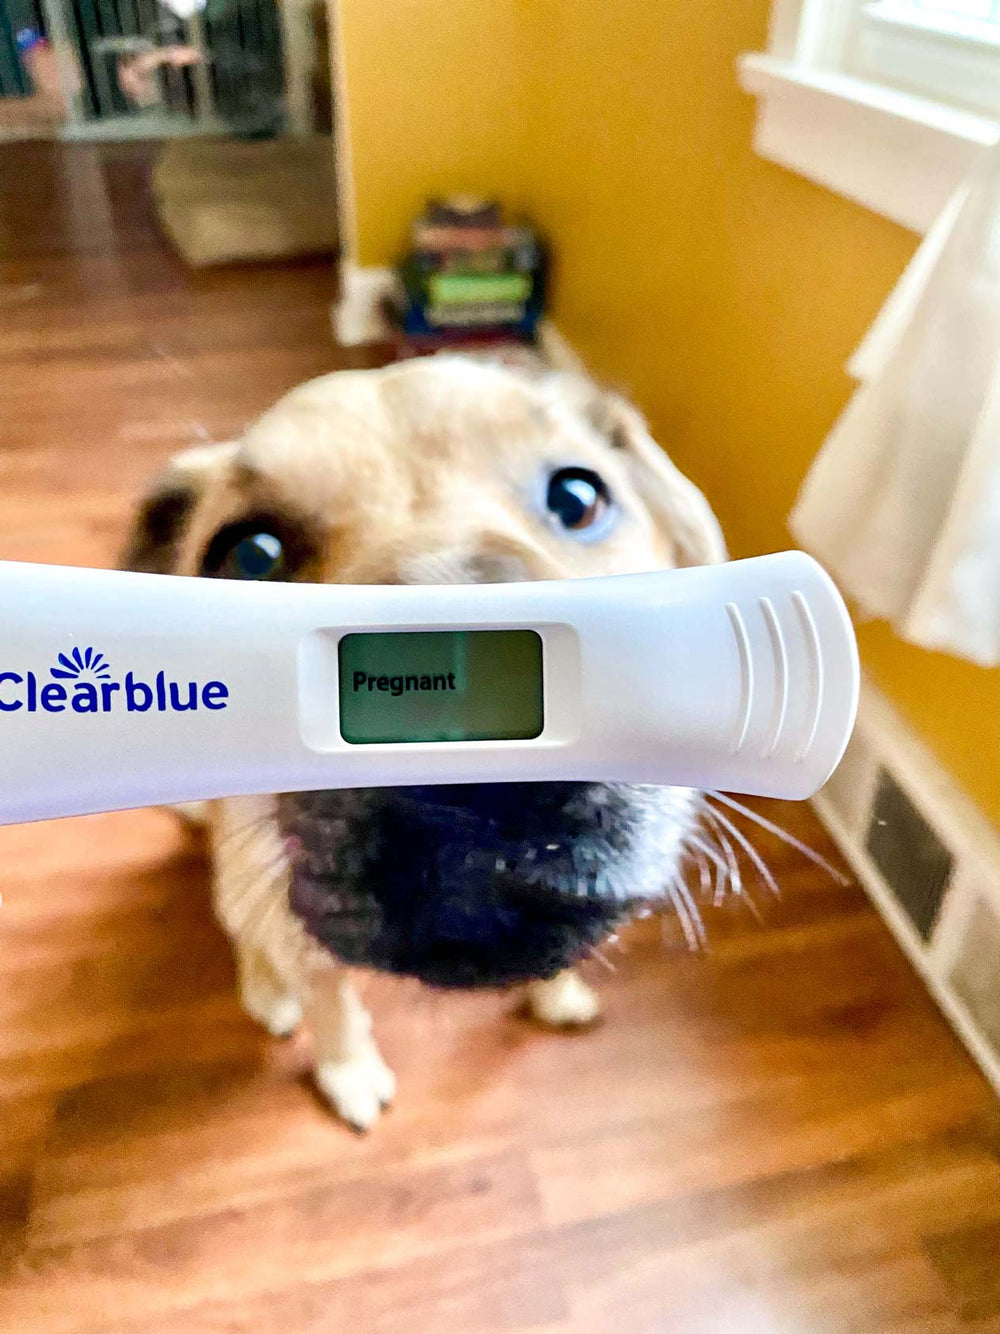 Positive pregnancy test in front of interested dog in a yellow room